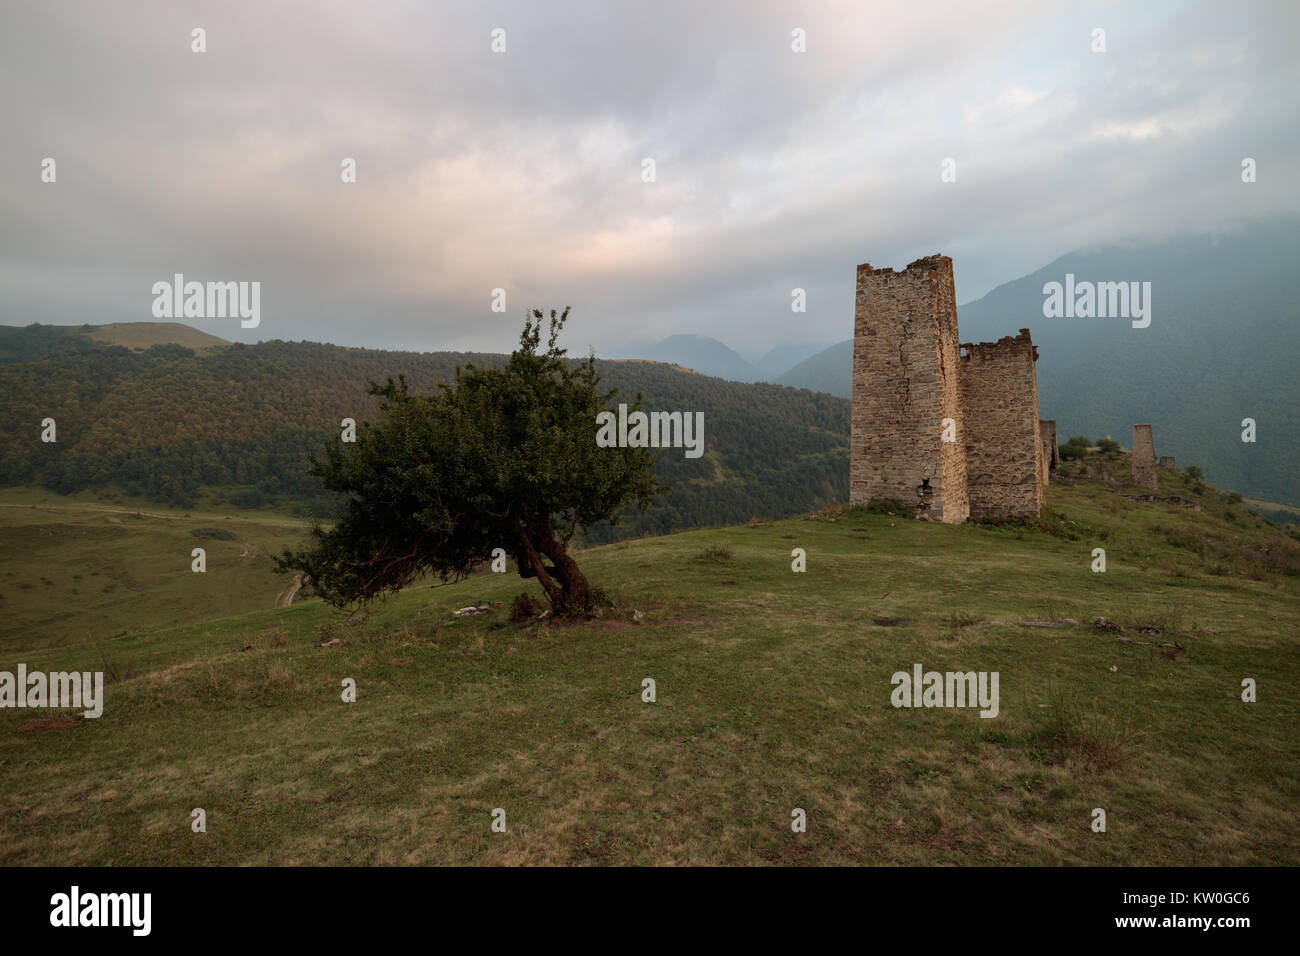 Residential medieval complex, Ingushetia mountains, Caucasus, the walls were made of stones of varying sizes (blocks or slabs) Stock Photo